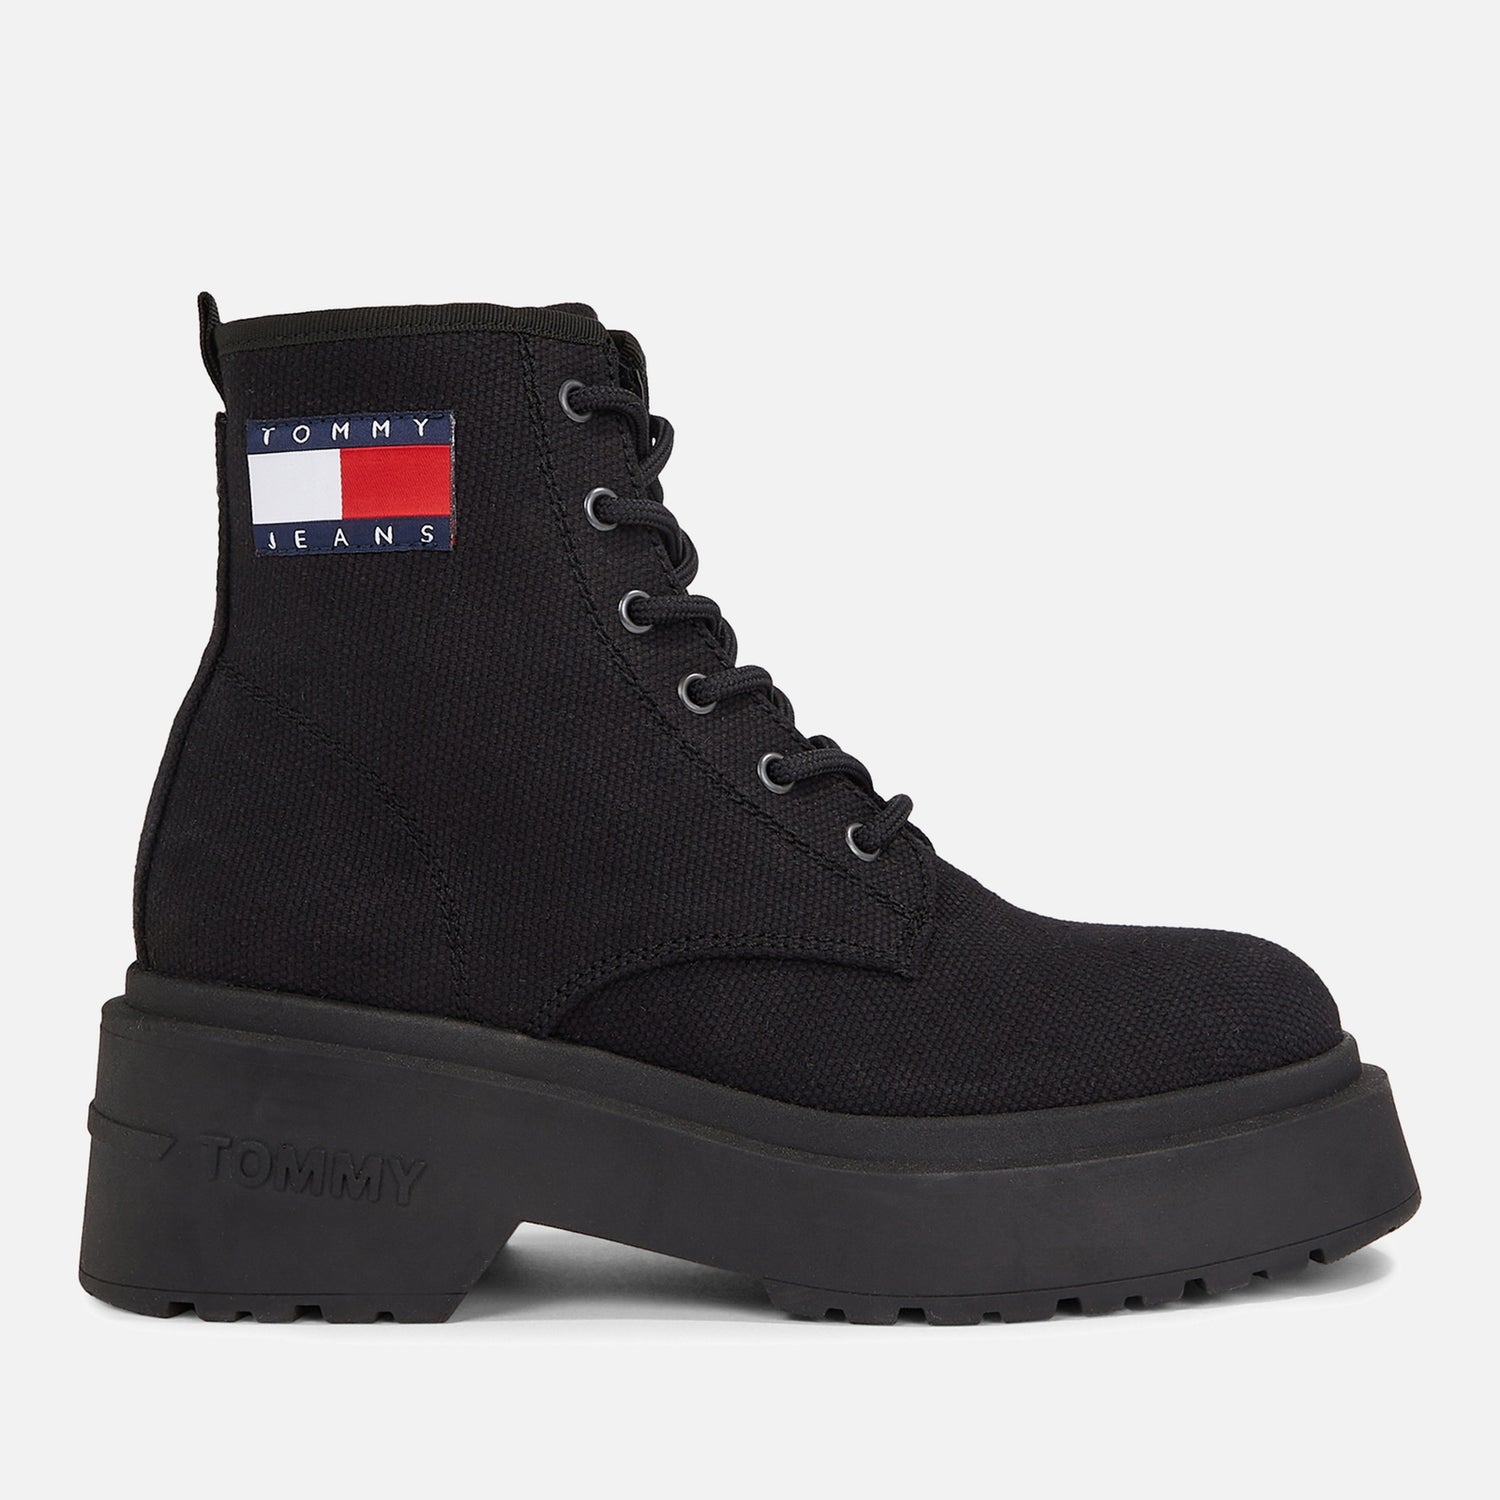 Tommy Jeans Women's Canvas Mid Boots - UK 3